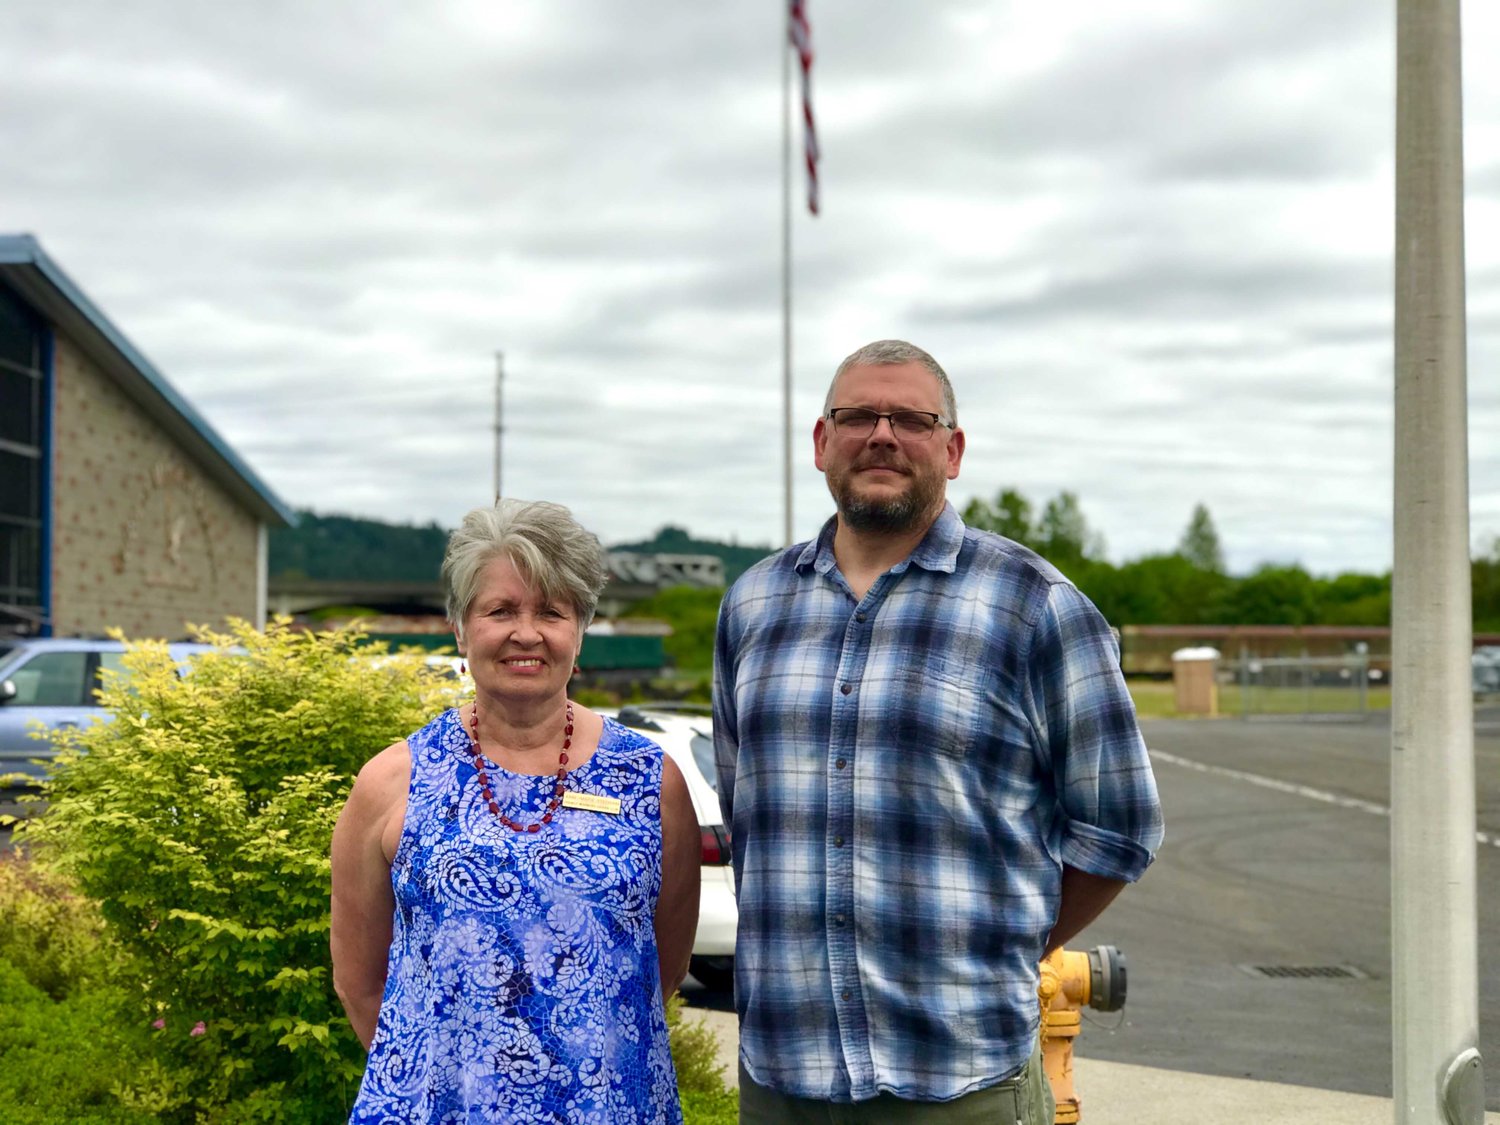 Anne Stedham, president of the Friendly Neighbors Garden Club, and Chip Duncan, the Veterans Memorial Museum executive director, pose for a photo outside the Veterans Memorial Museum in Chehalis.